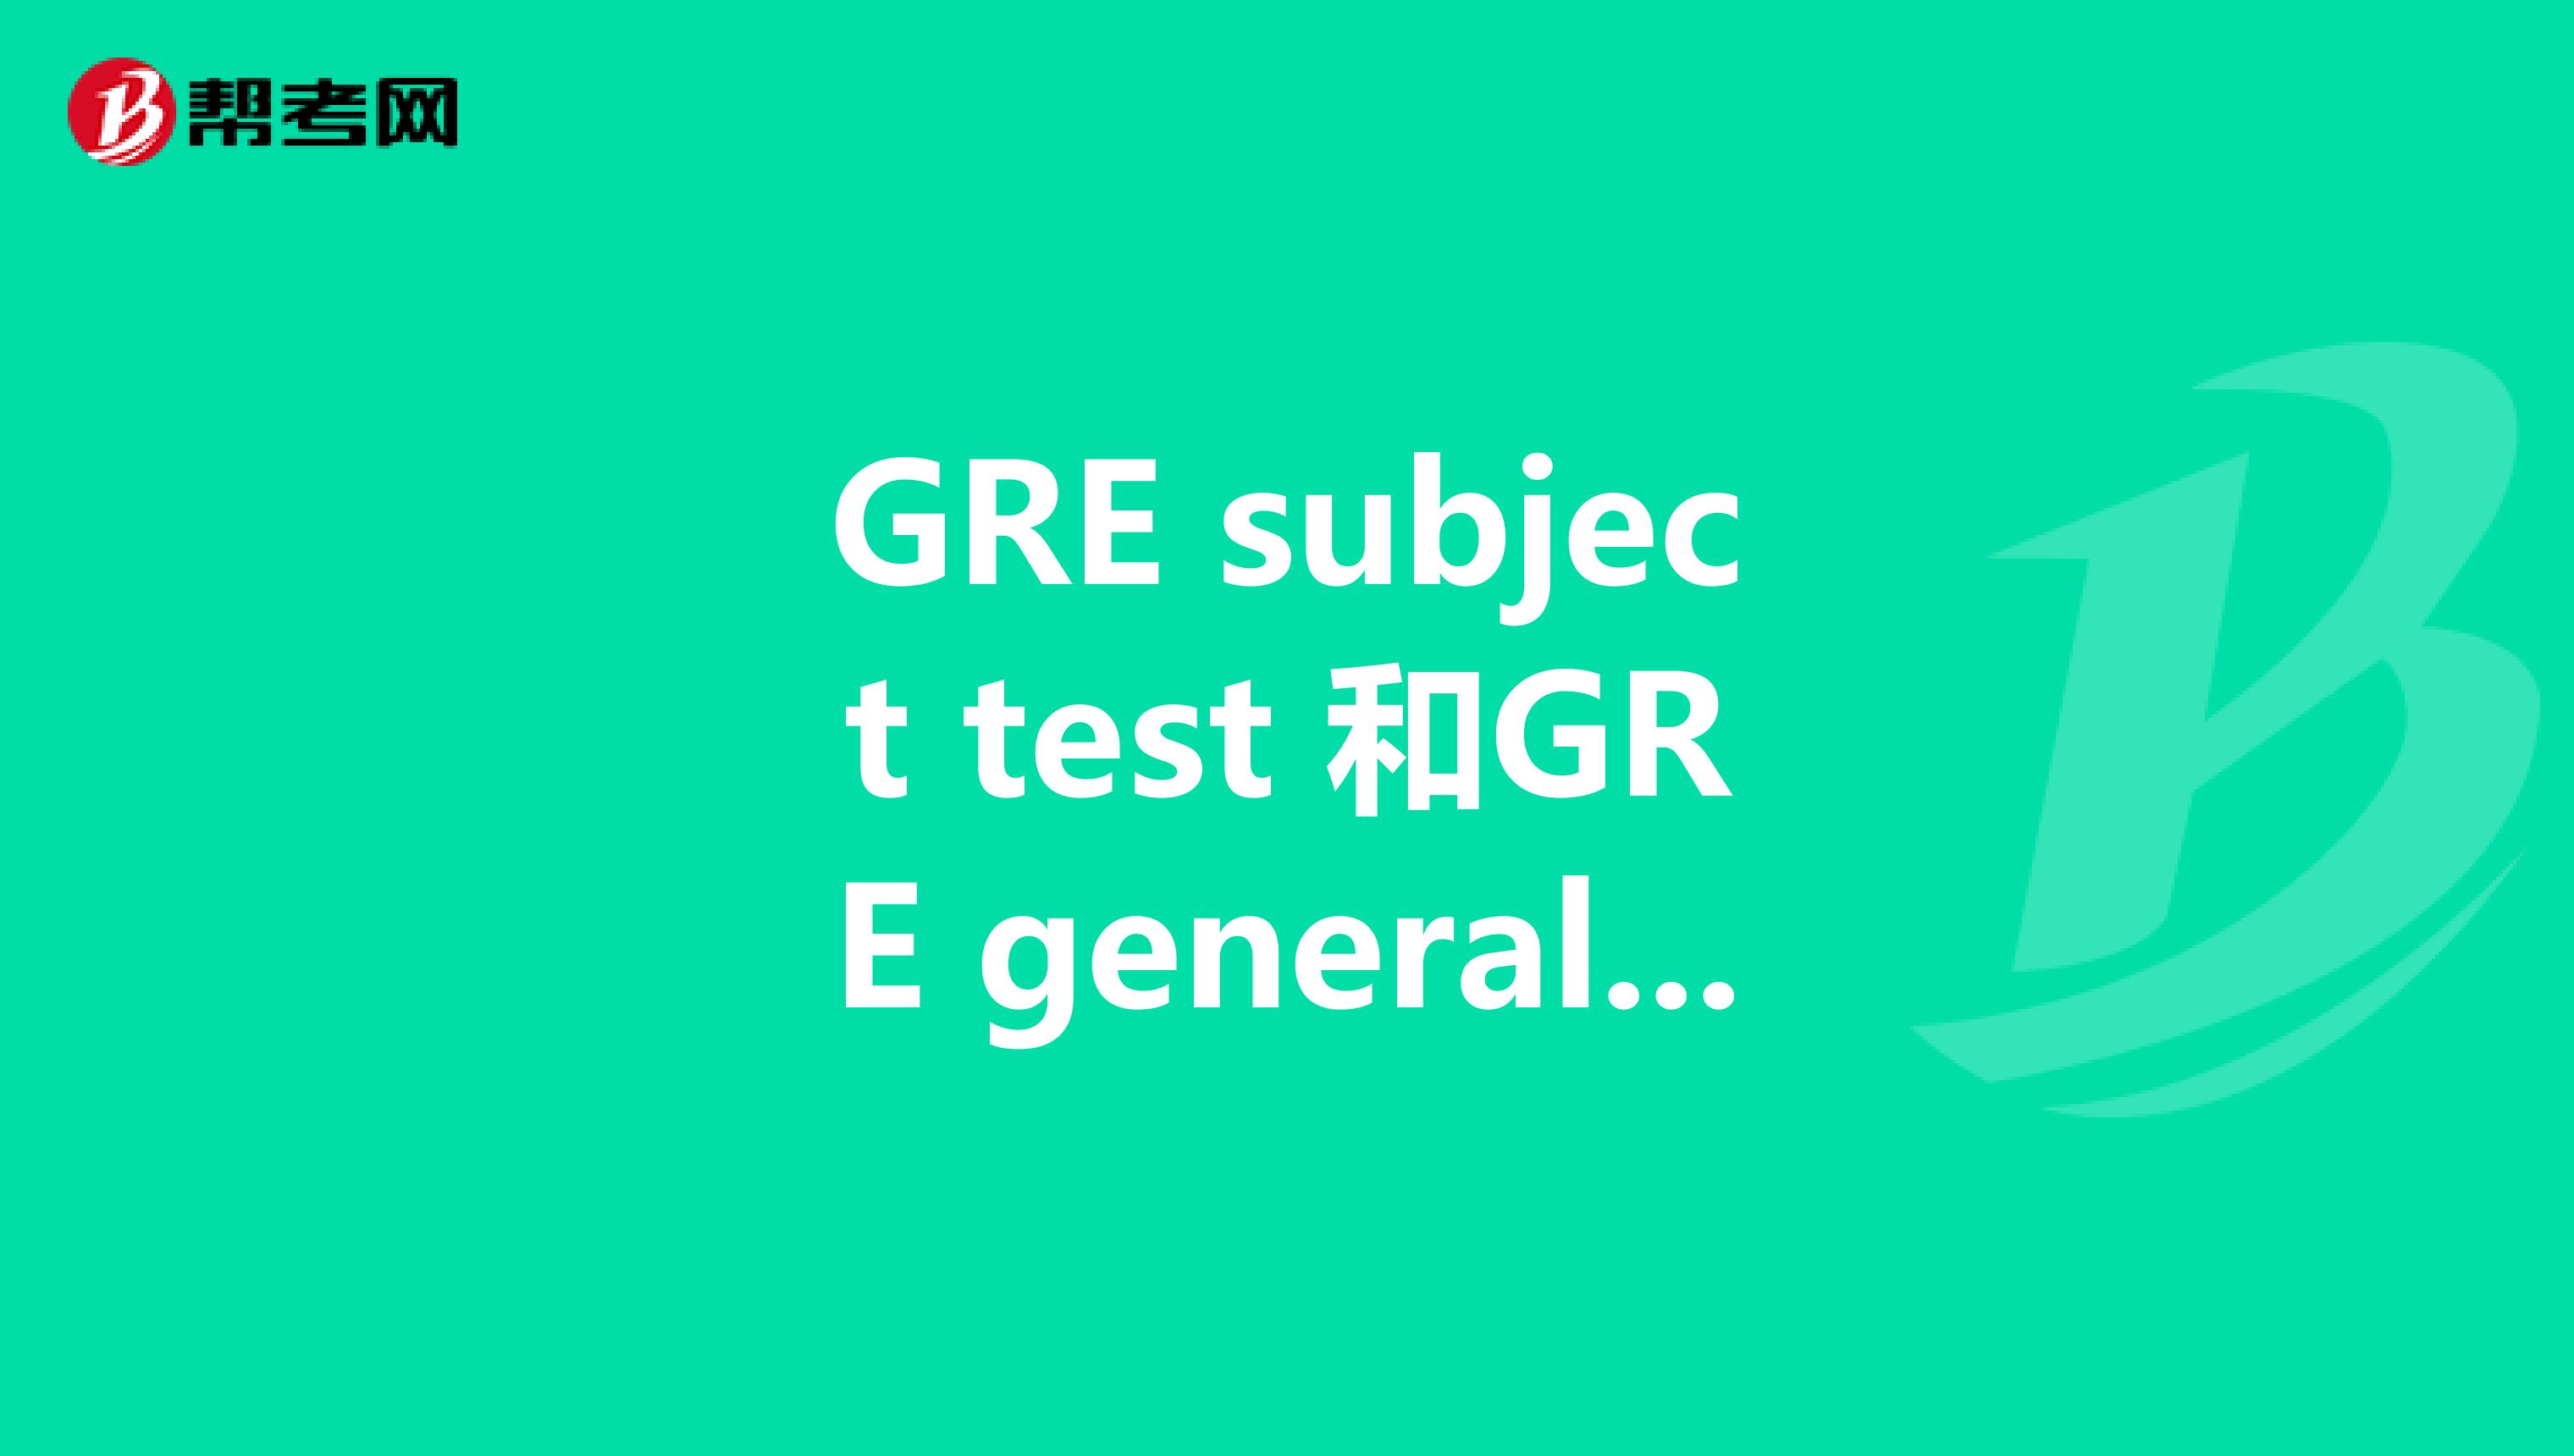 GRE subject test 和GRE general test 有什么区别？